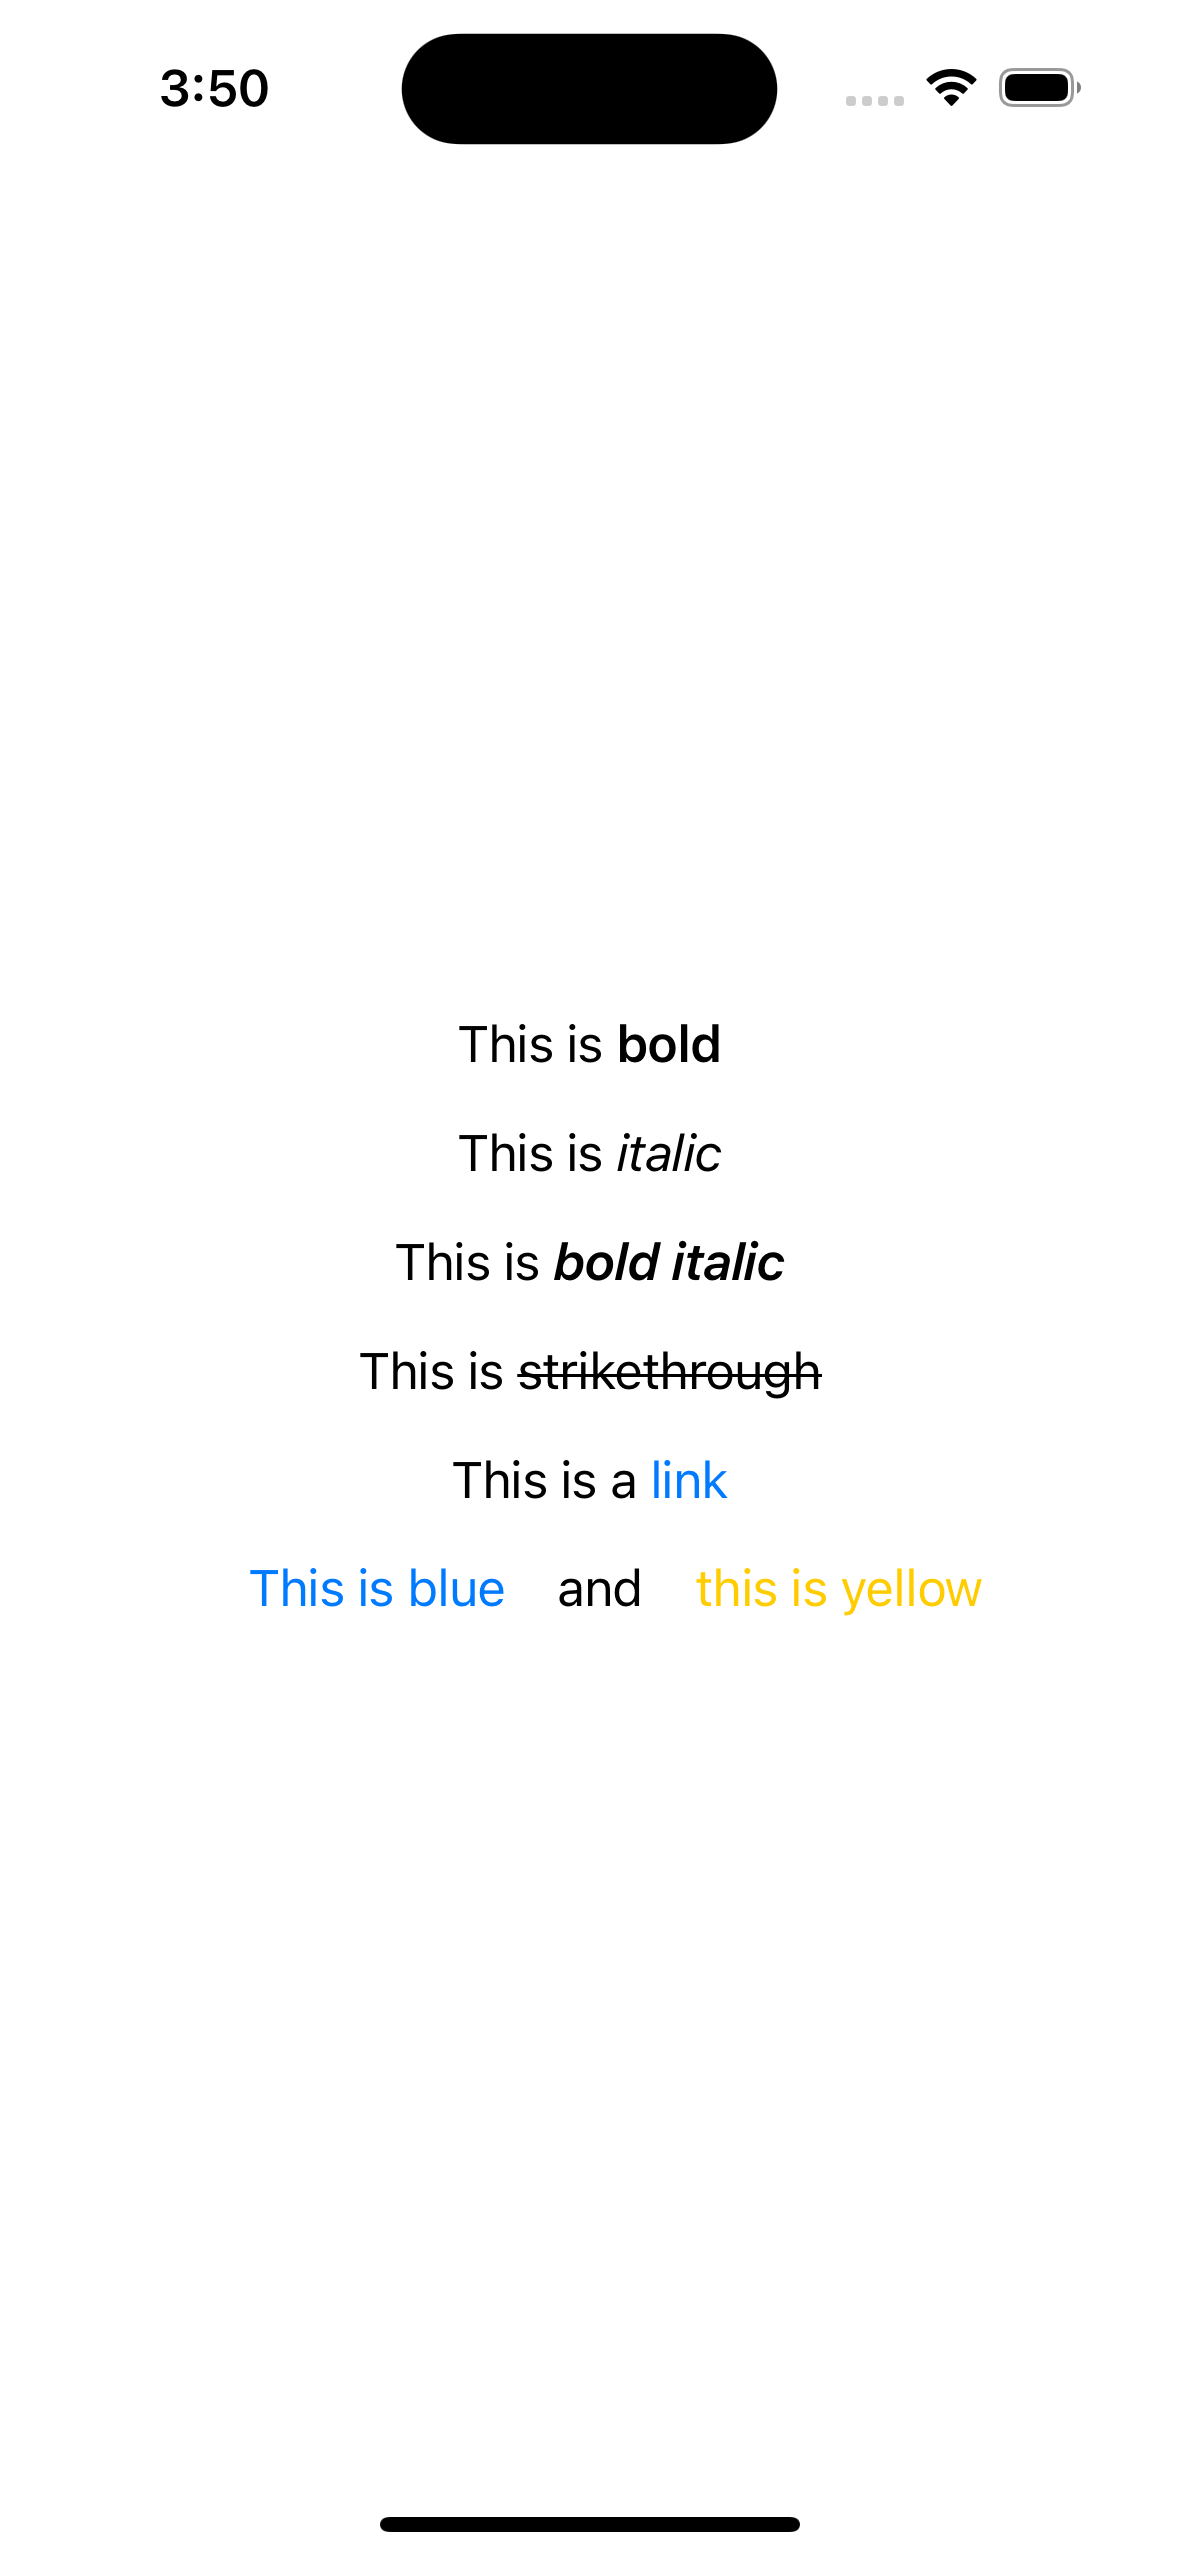 How to style a Text in SwiftUI